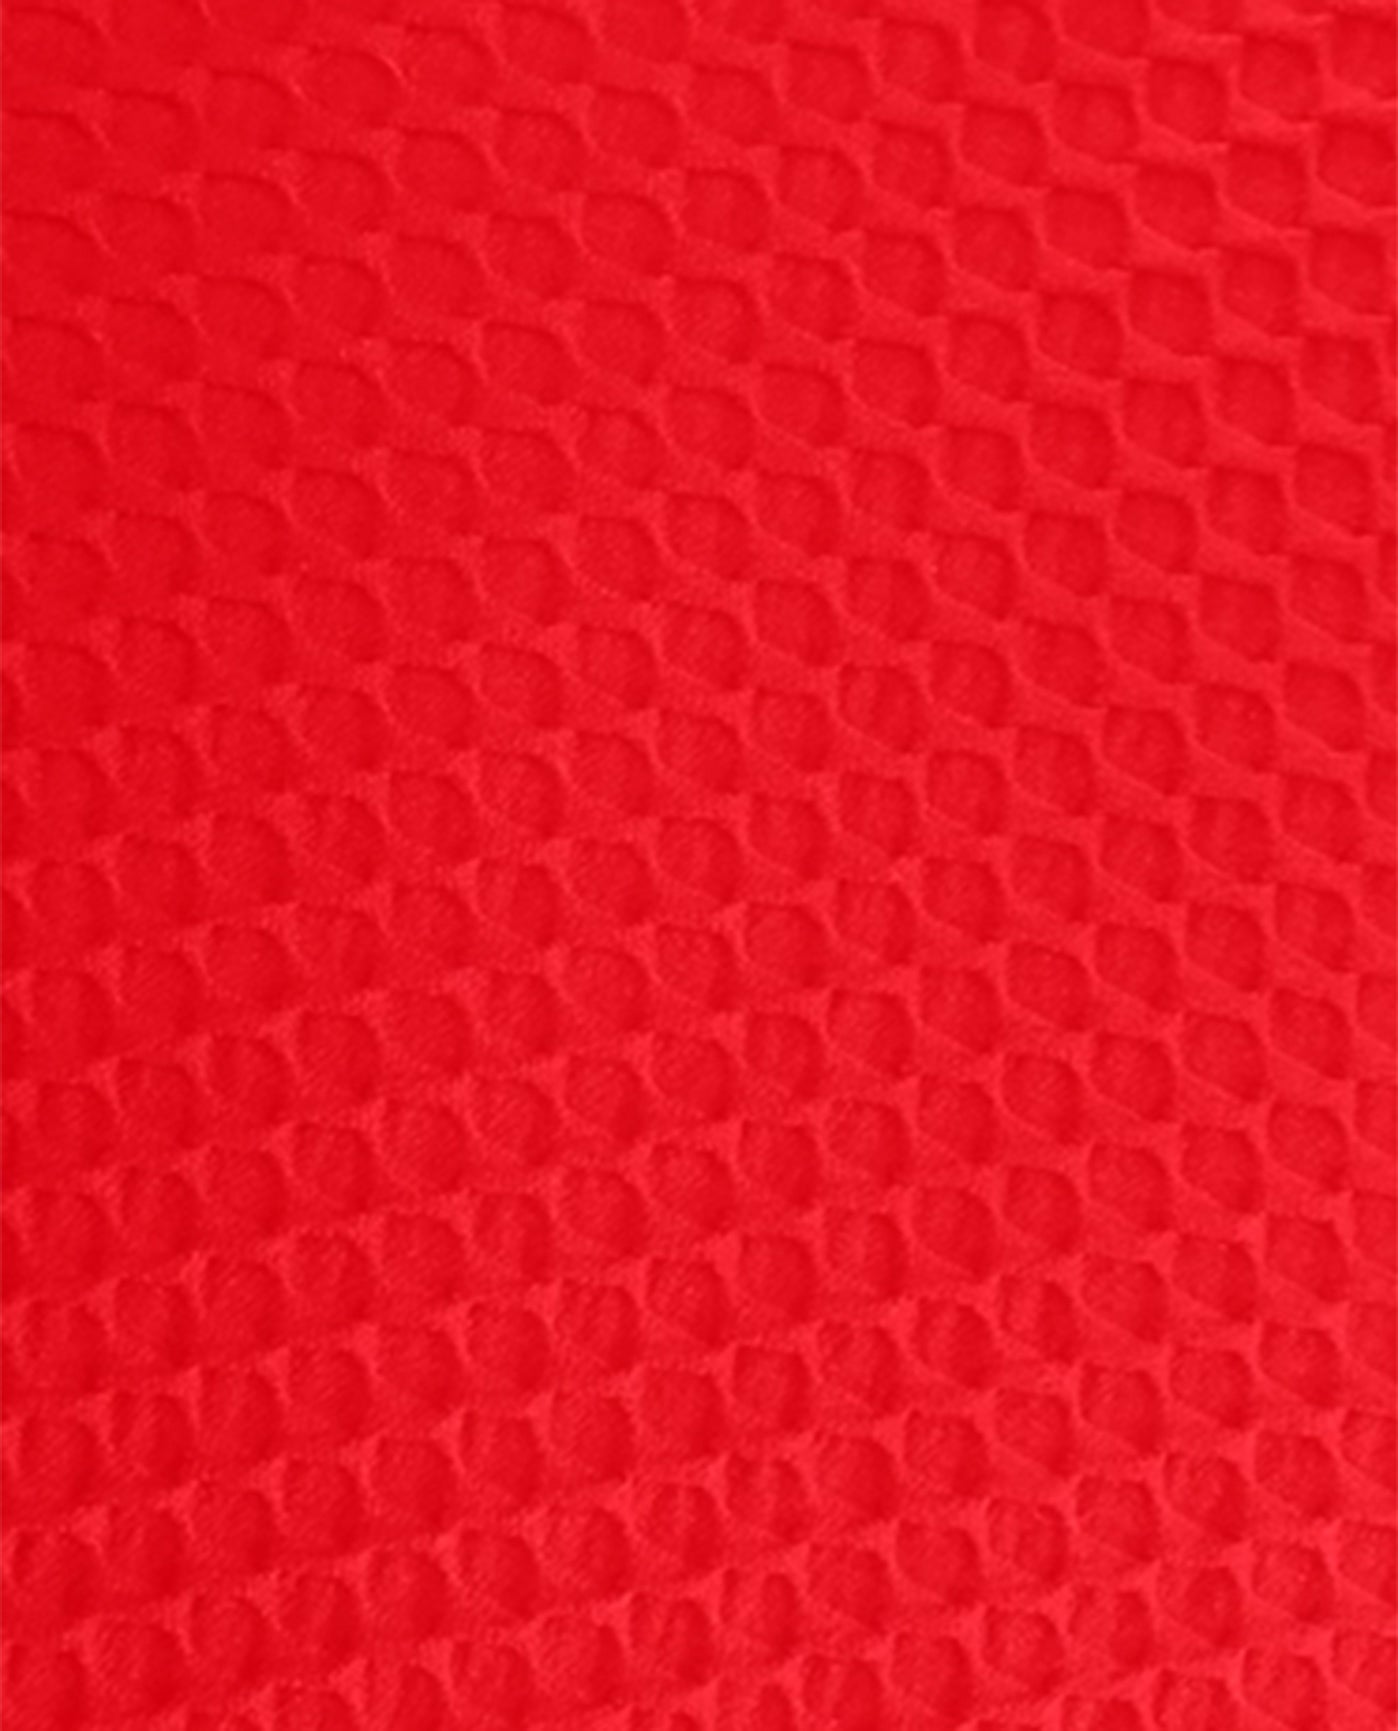 FABRIC SWATCH VIEW OF CHLORINE RESISTANT AQUAMORE SOLID TEXTURED SCOOP NECK LONG TORSO ONE PIECE SWIMSUIT | 512 AQT TEXTURED SCARLET